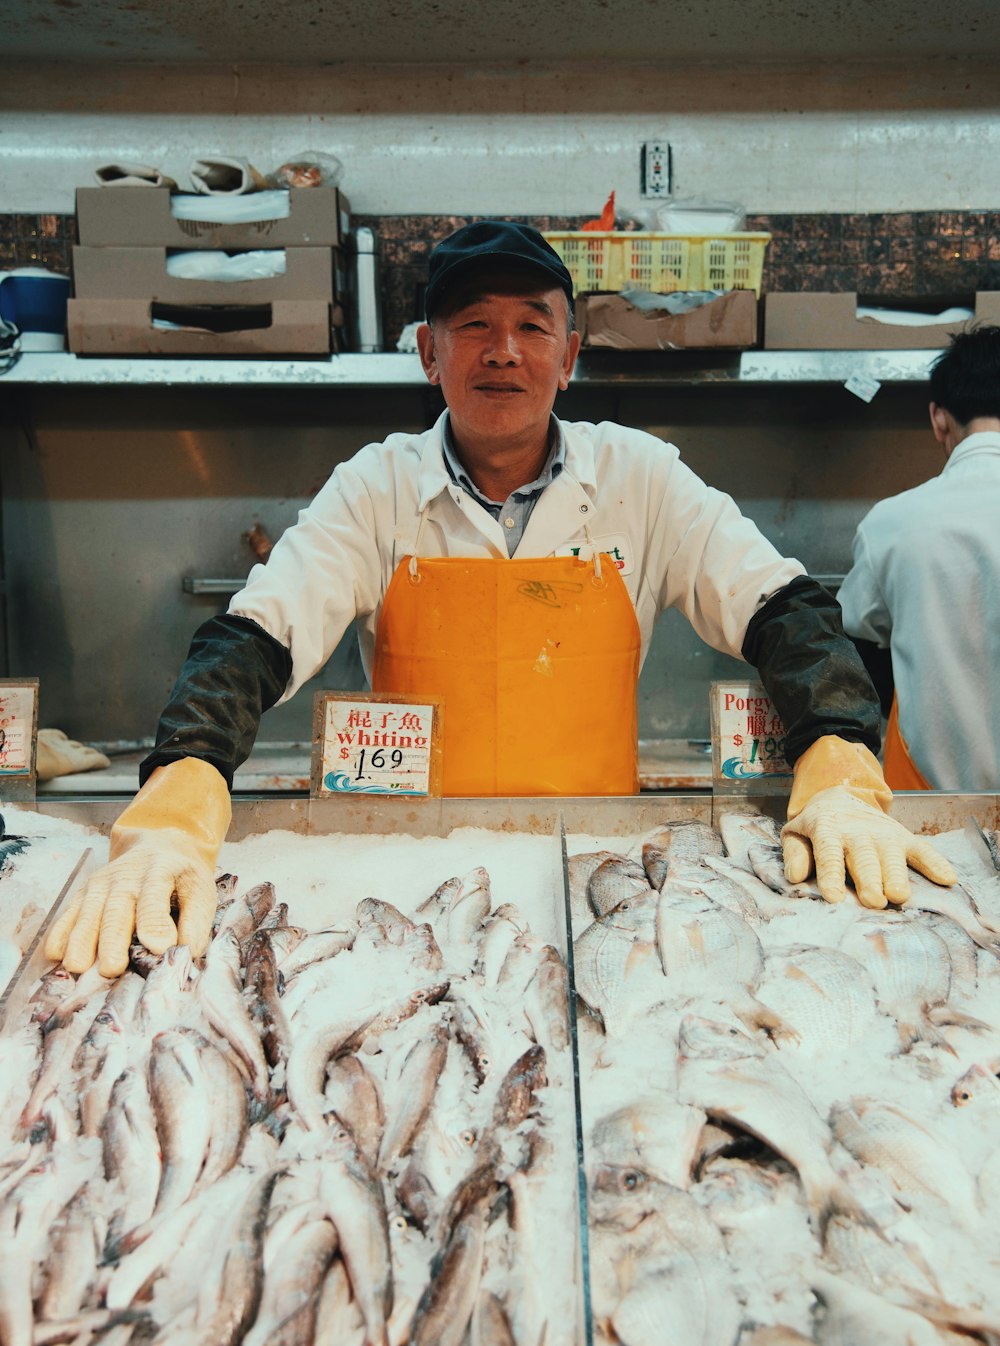 man wearing white polo shirt and brown apron standing near fish stands